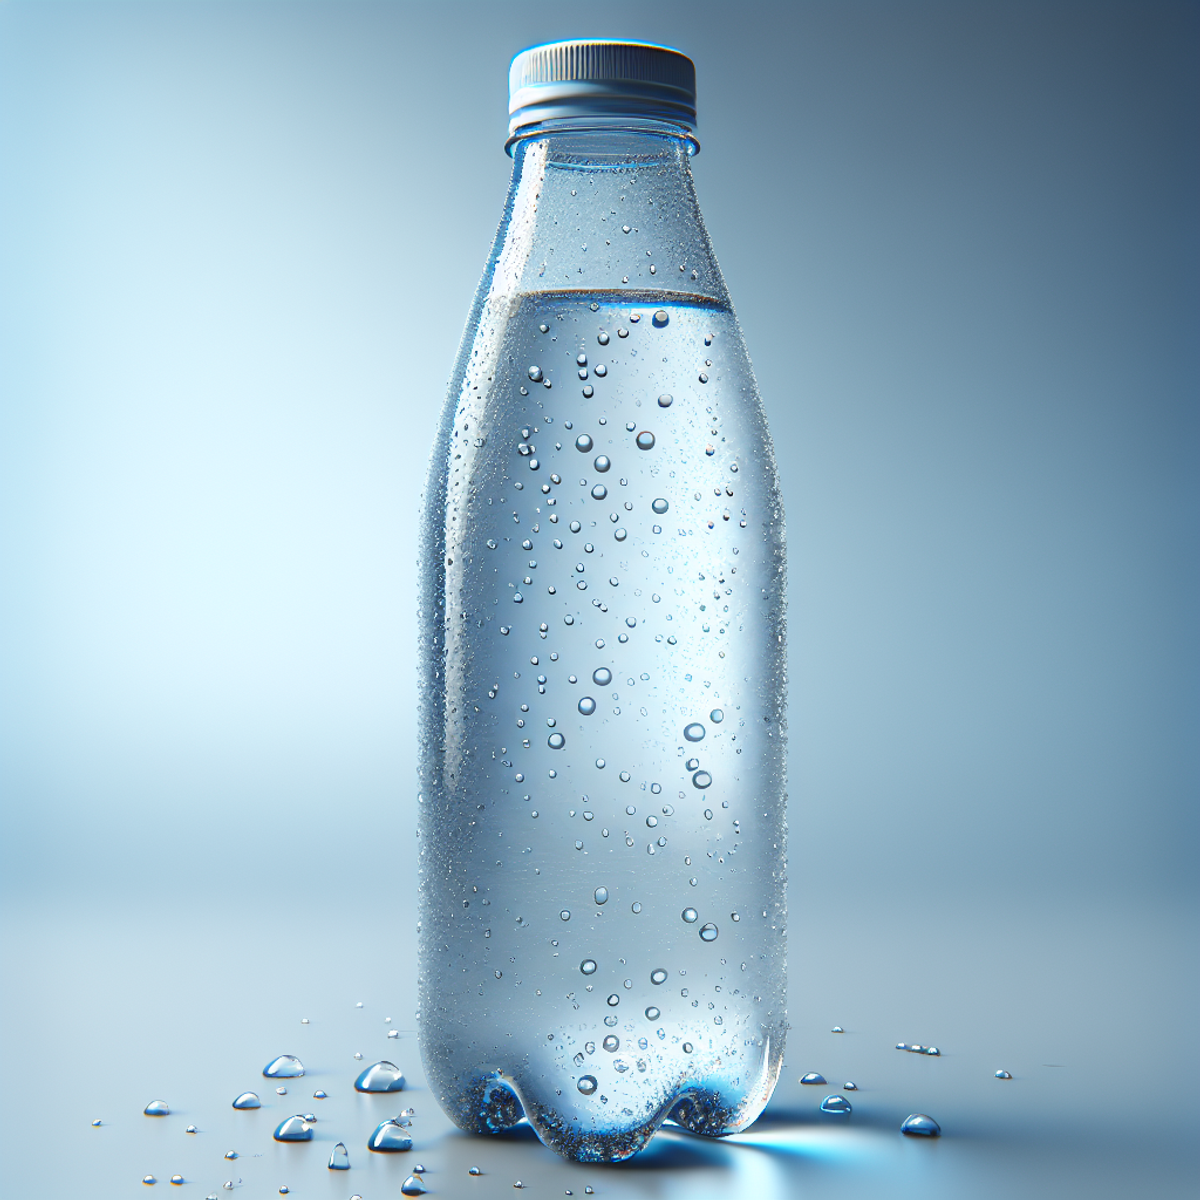 A close-up image of a svelte glass water bottle filled with cold, clear water with emphasized water droplets on the outer surface depicting coldness.